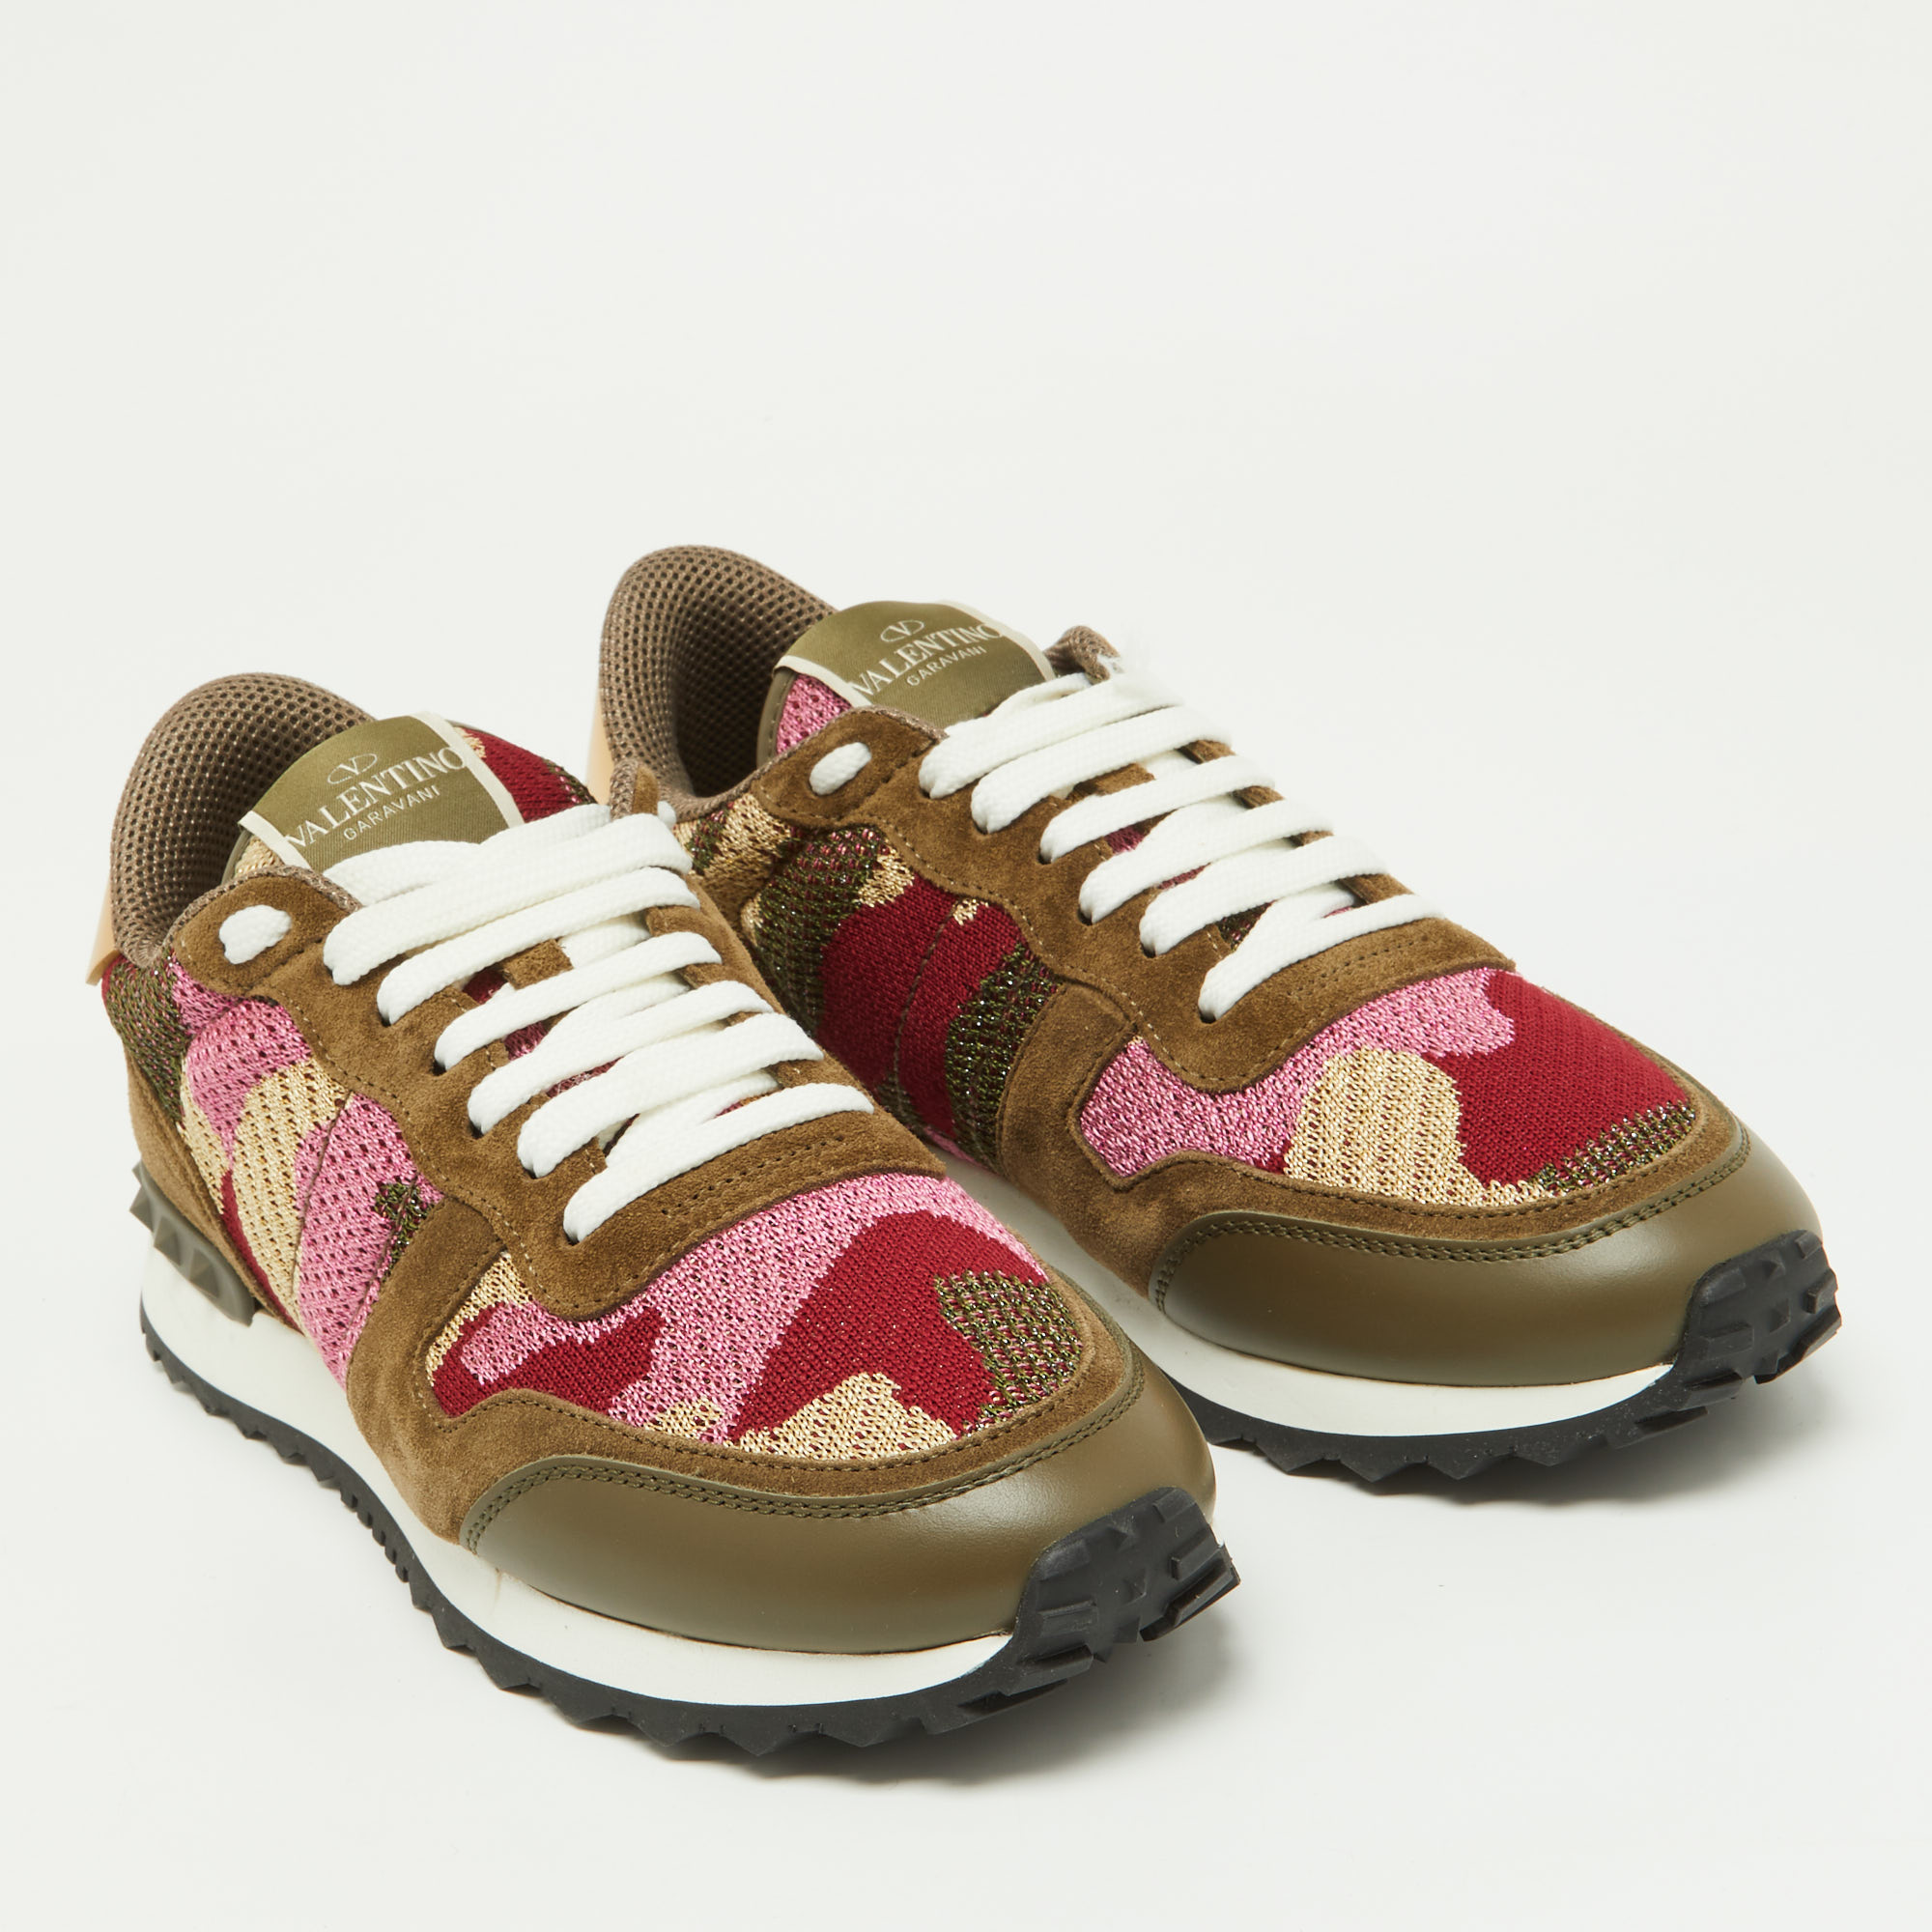 Valentino Multicolor Camo Print Suede,Leather And Knit Fabric Rockrunner Sneakers Size 38